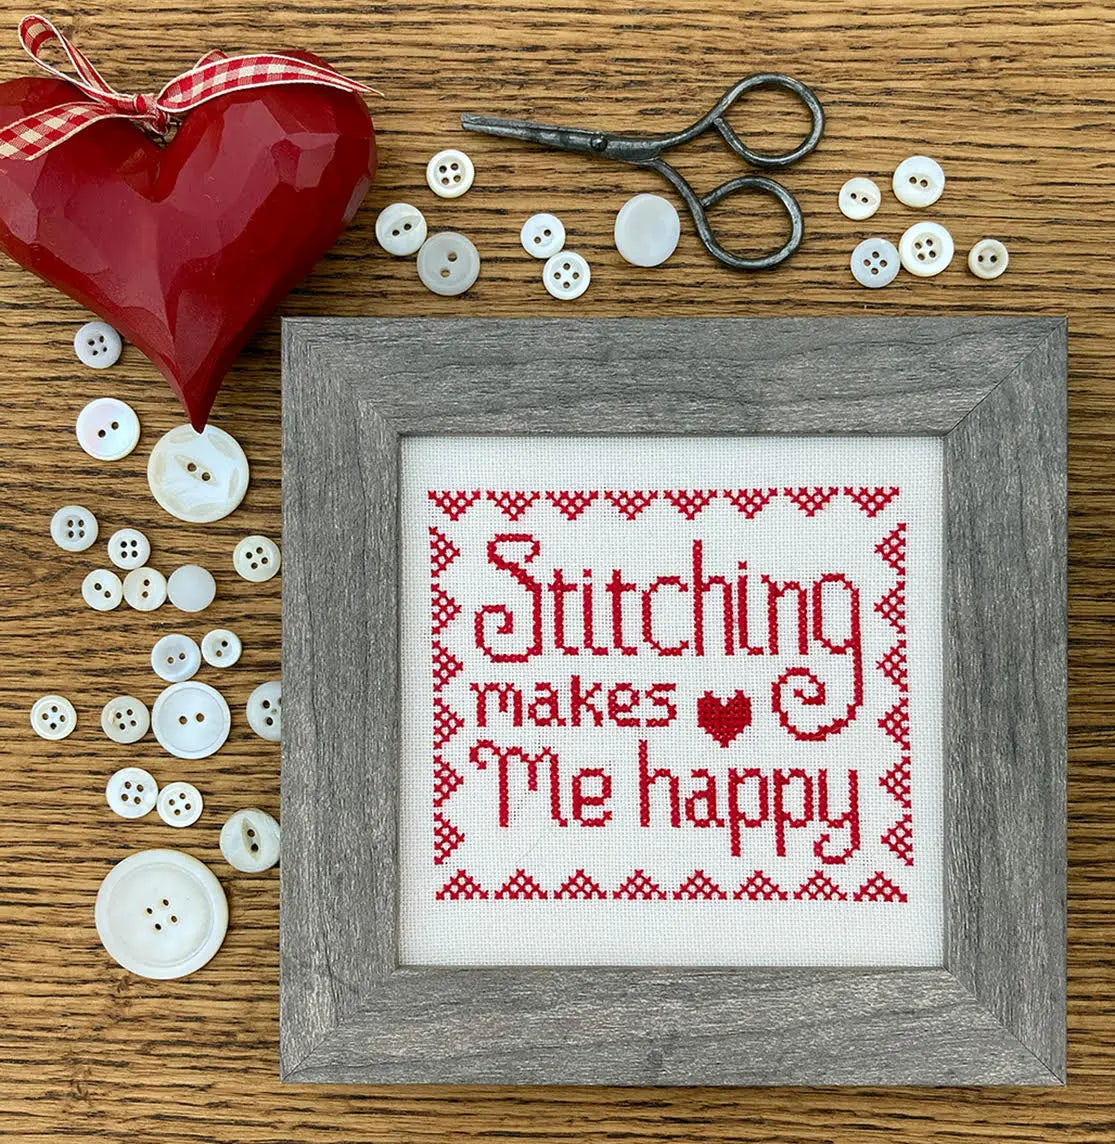 Stitching Makes Me Happy by Colorado Cross Stitcher Colorado Cross Stitcher